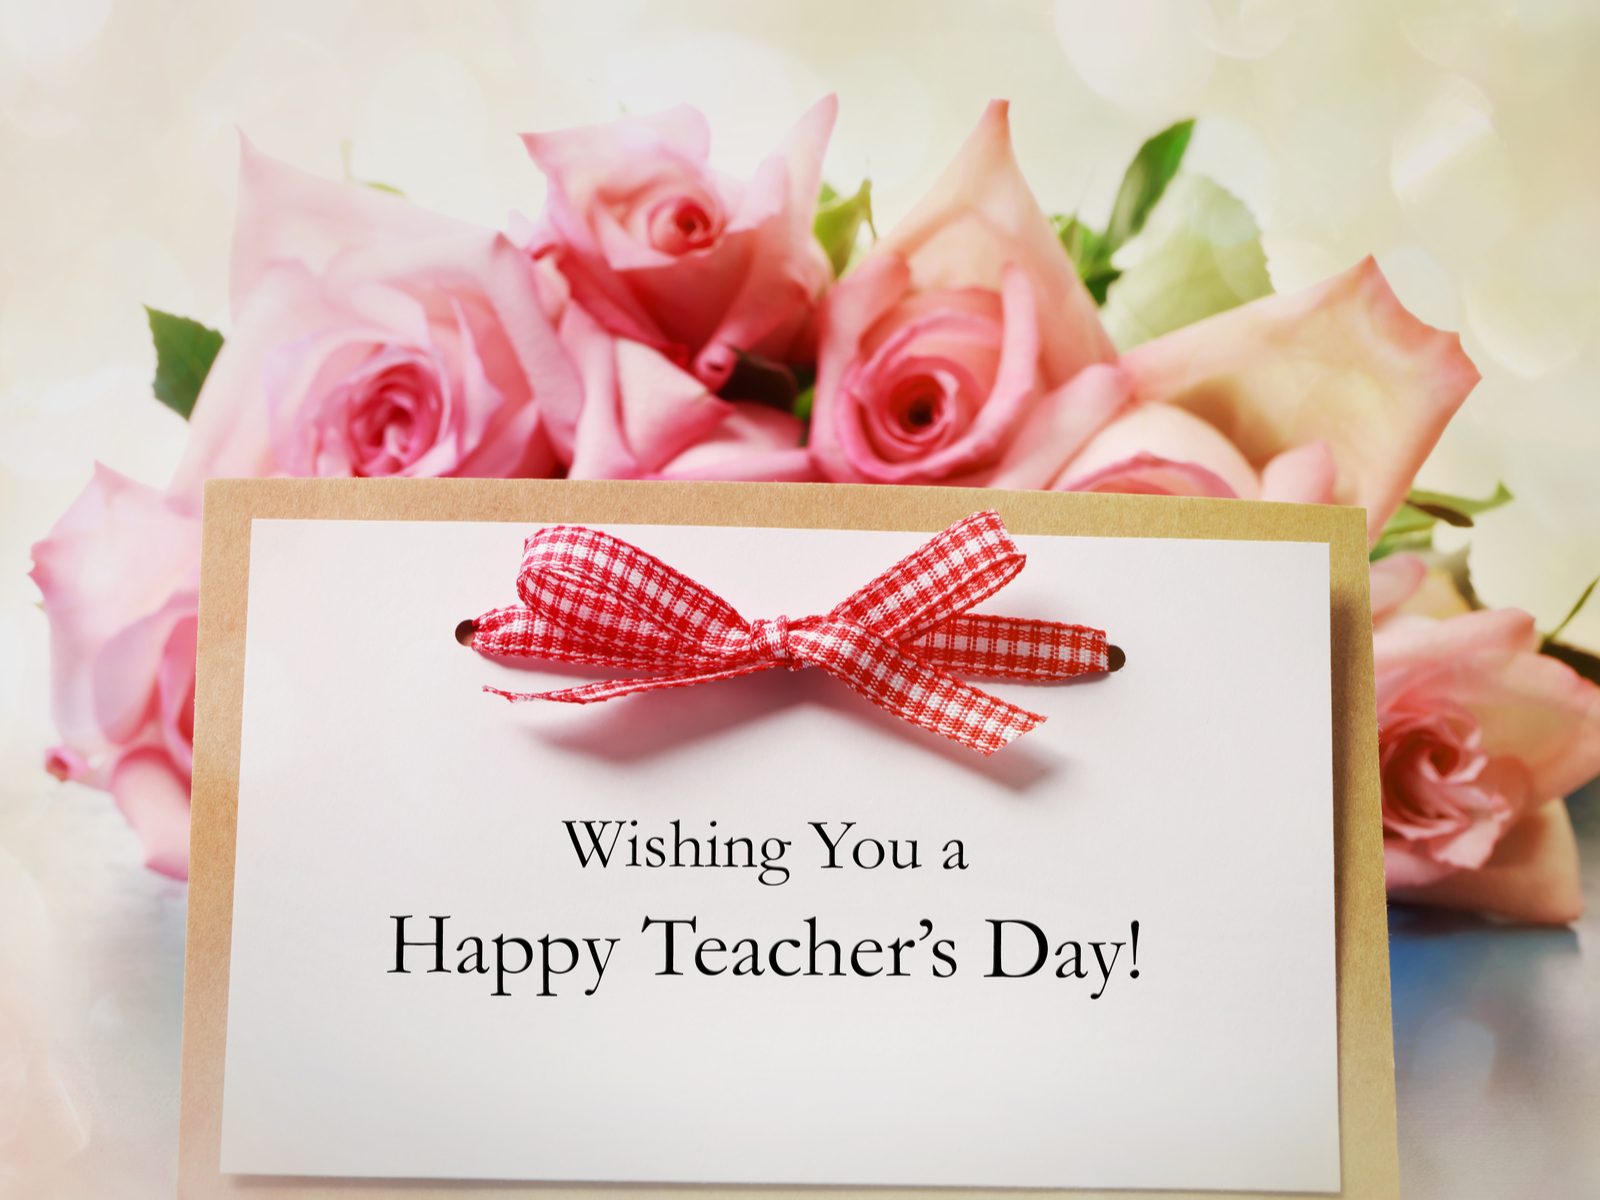 Stream episode Best Teacher Day Gift Idea for Mam by Gift Chocolates to  Teacher podcast | Listen online for free on SoundCloud